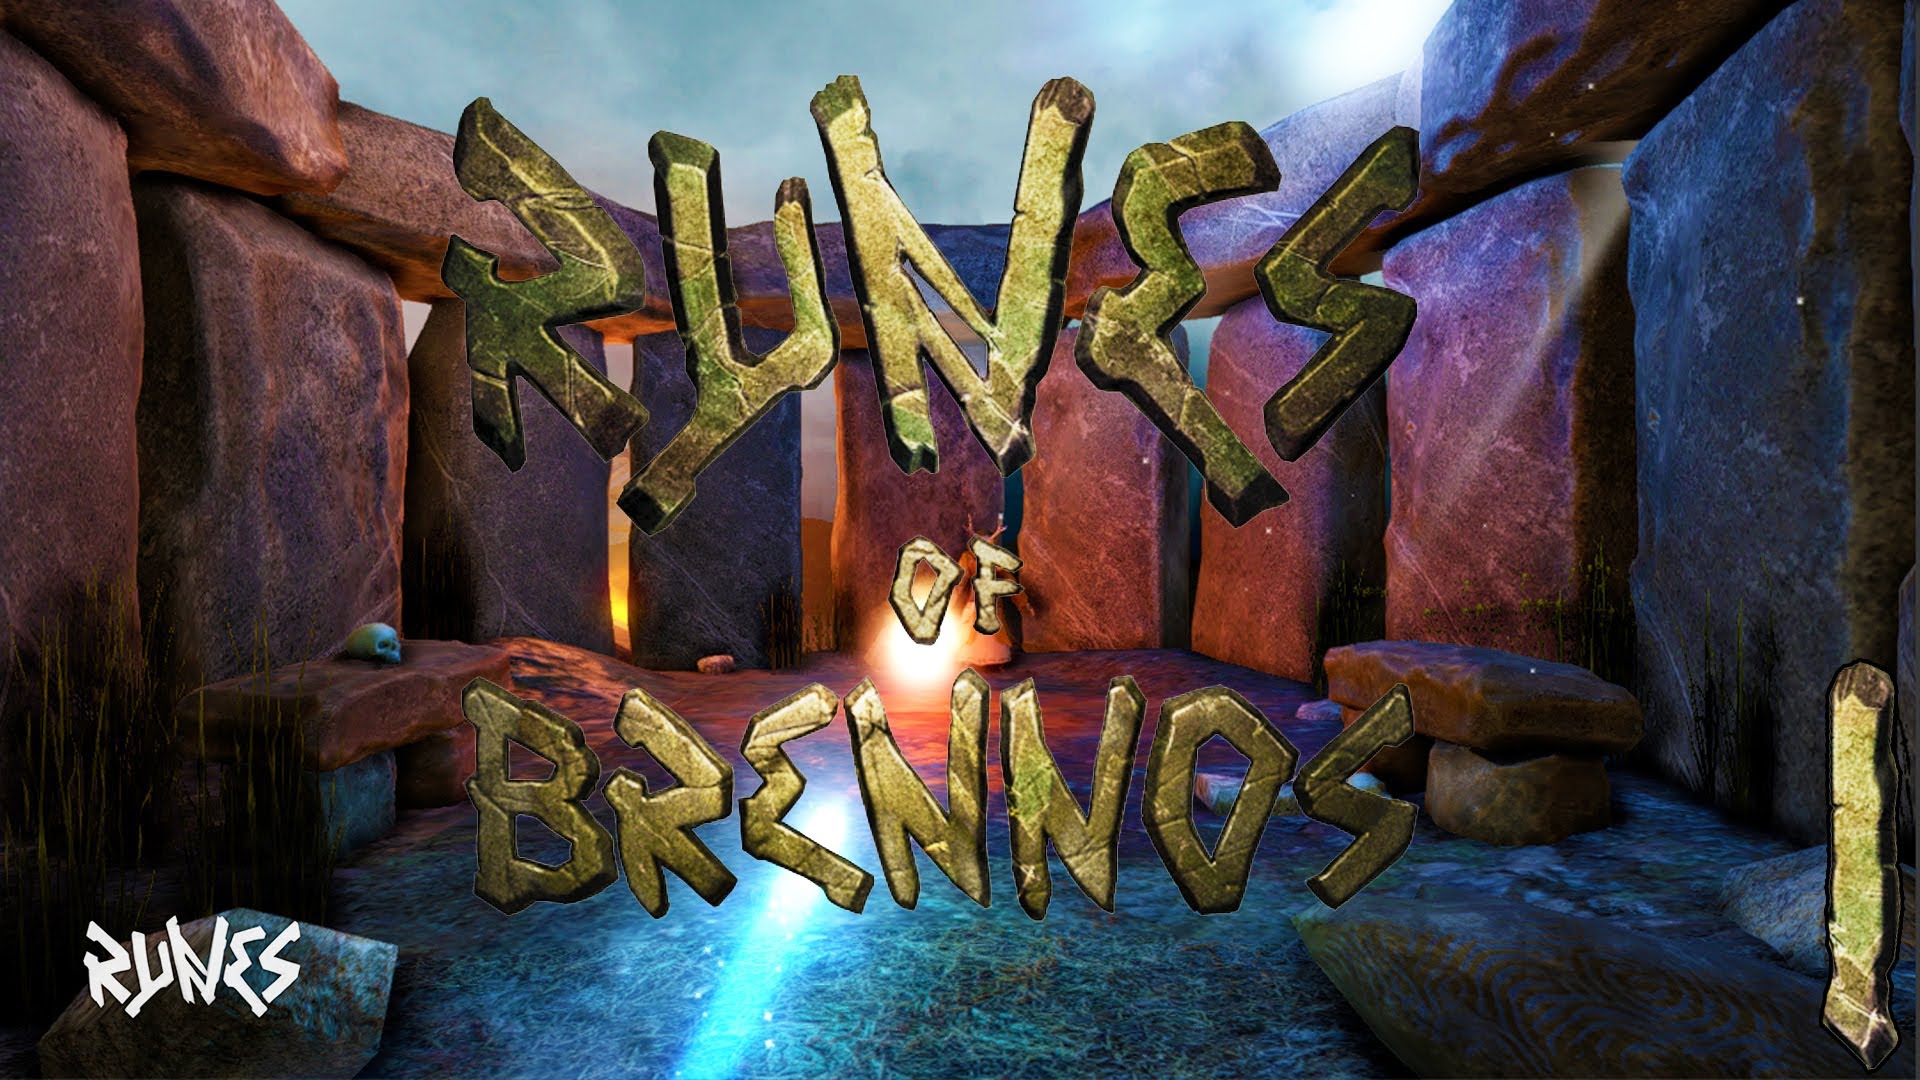 Runes Of Brennos Backgrounds, Compatible - PC, Mobile, Gadgets| 1920x1080 px